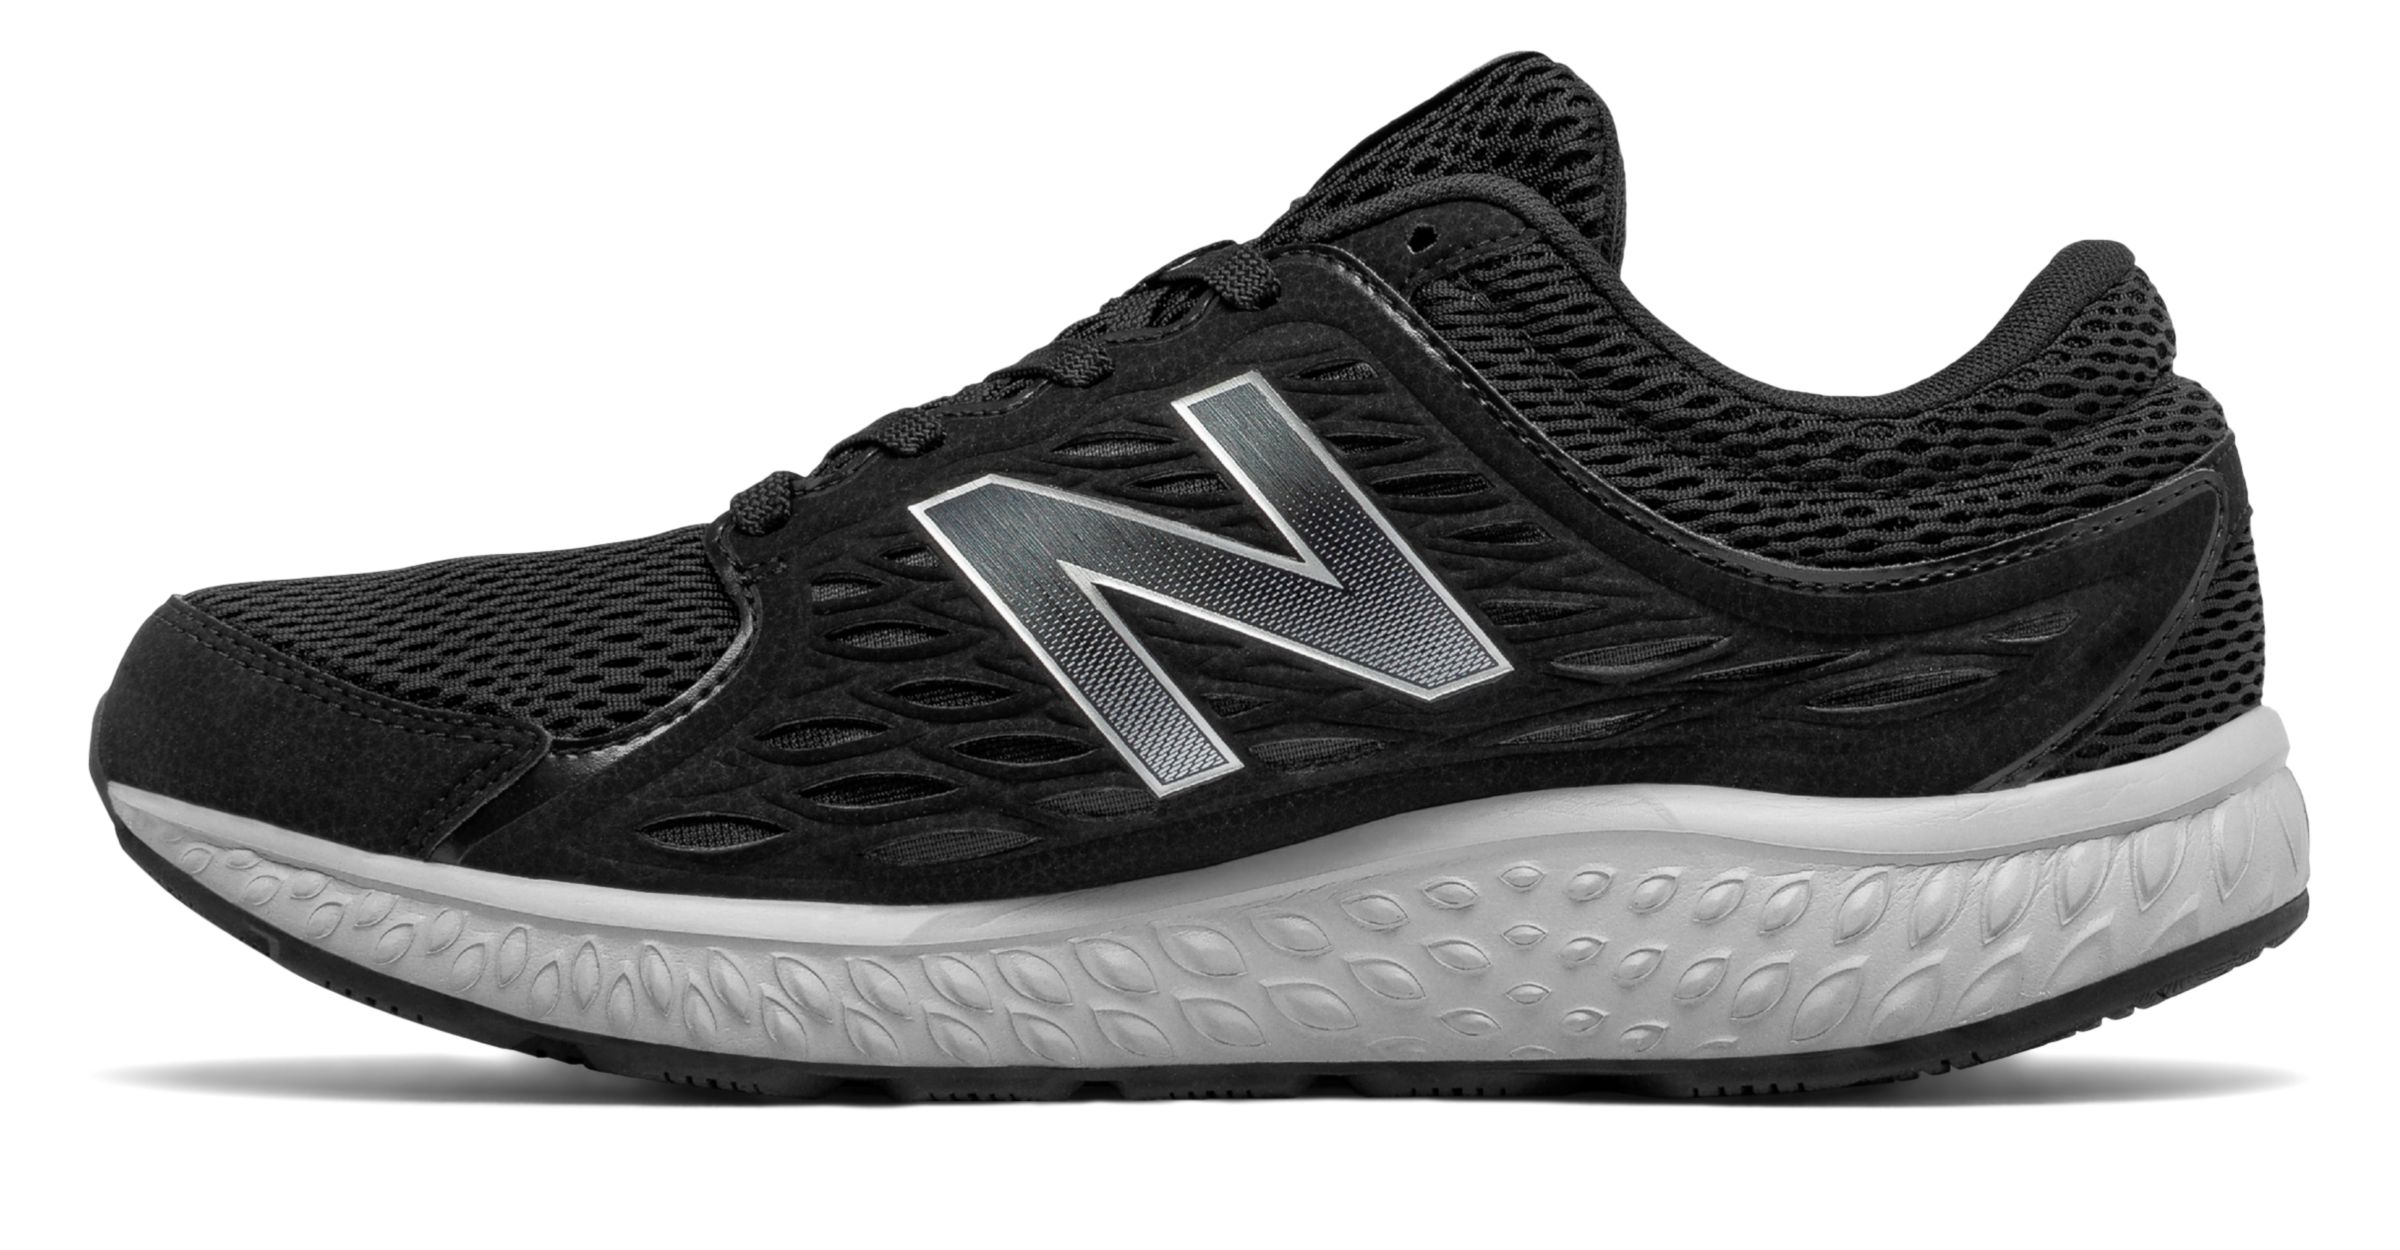 New Balance M420-V3 on Sale - Discounts Up to 58% Off on M420LB3 at Joe's New  Balance Outlet